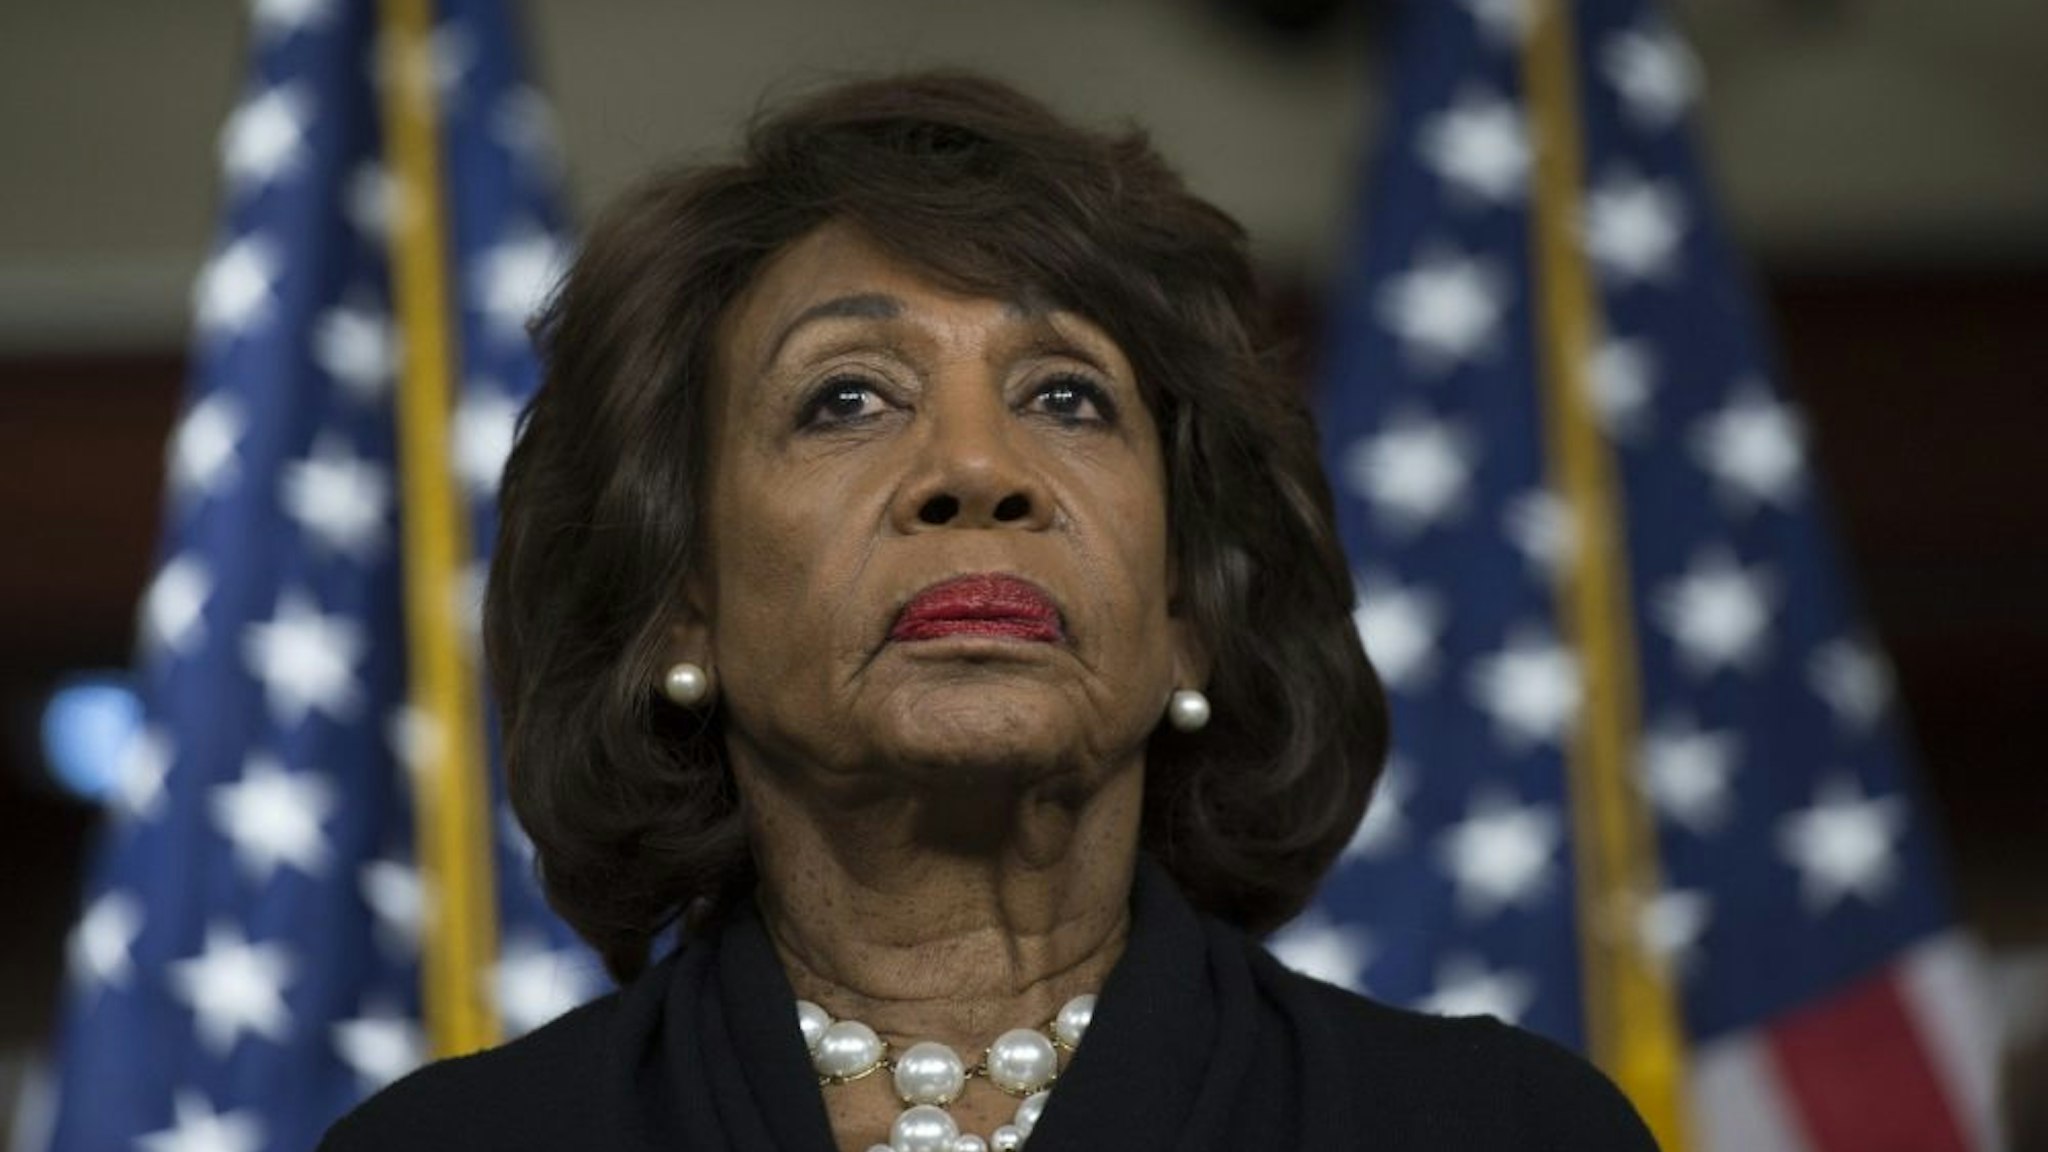 US Representative Maxine Waters (D-CA) looks on before speaking to reports regarding the Russia investigation on Capitol Hill in Washington, DC on January 9, 2018.